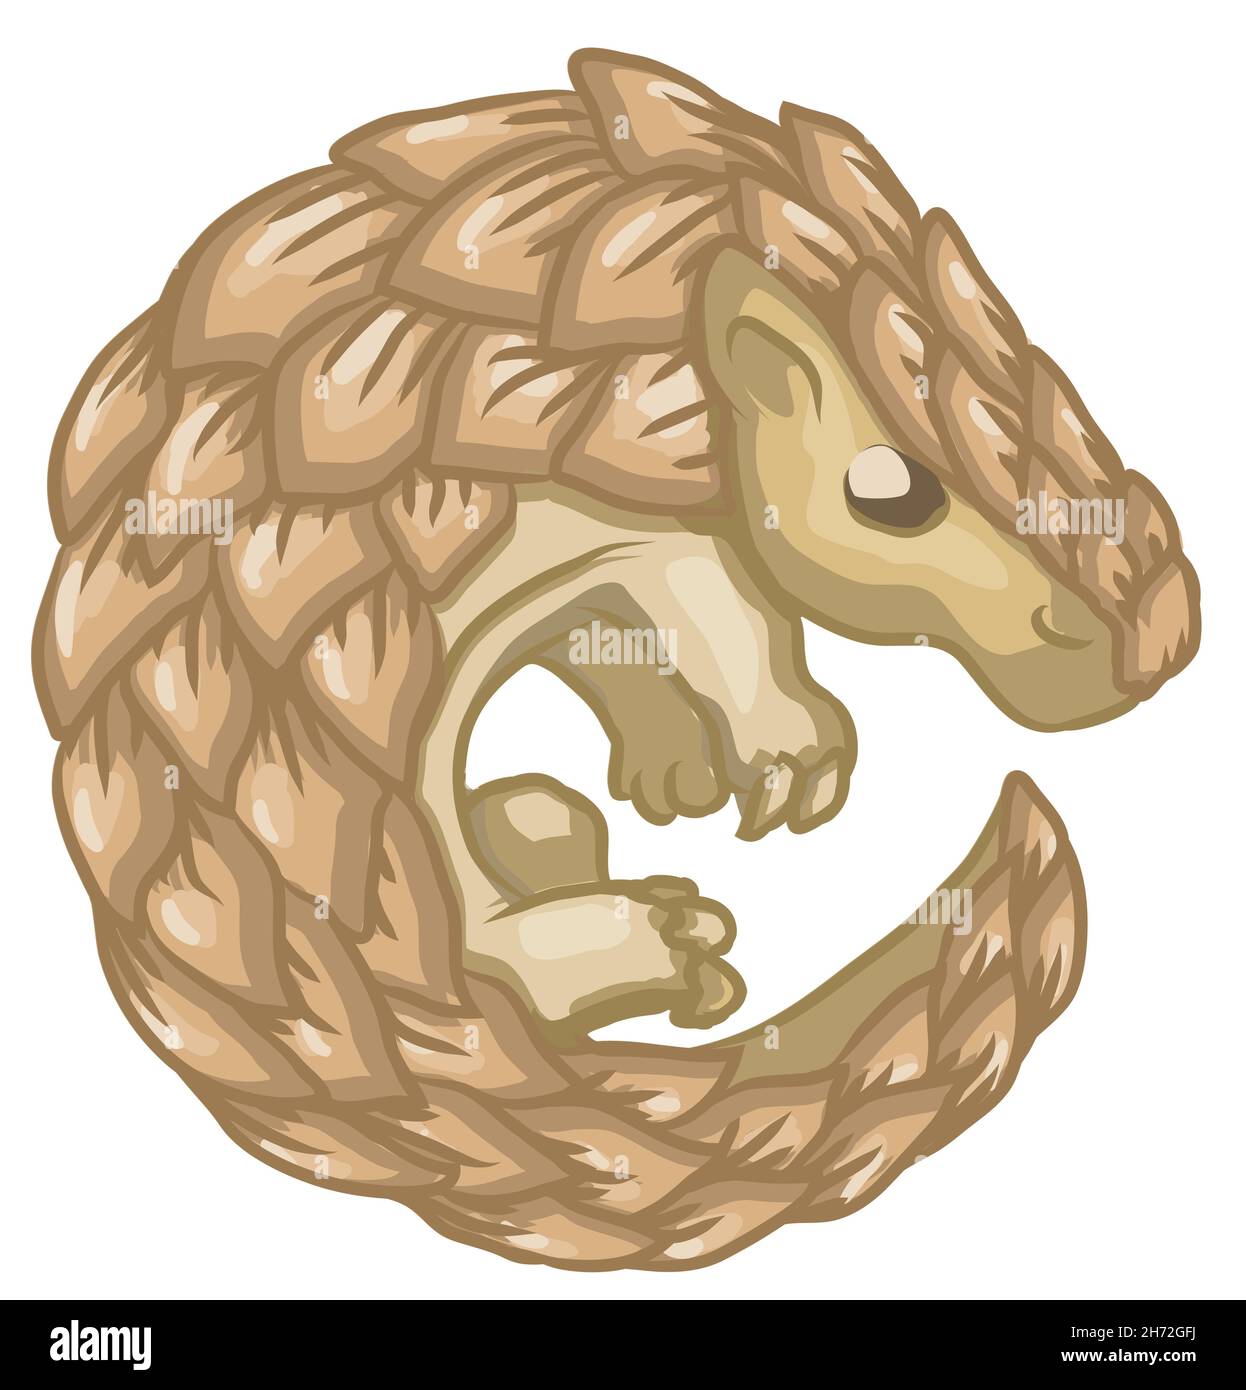 Pangolin PNG White Transparent And Clipart Image For Free Download -  Lovepik | 401707352